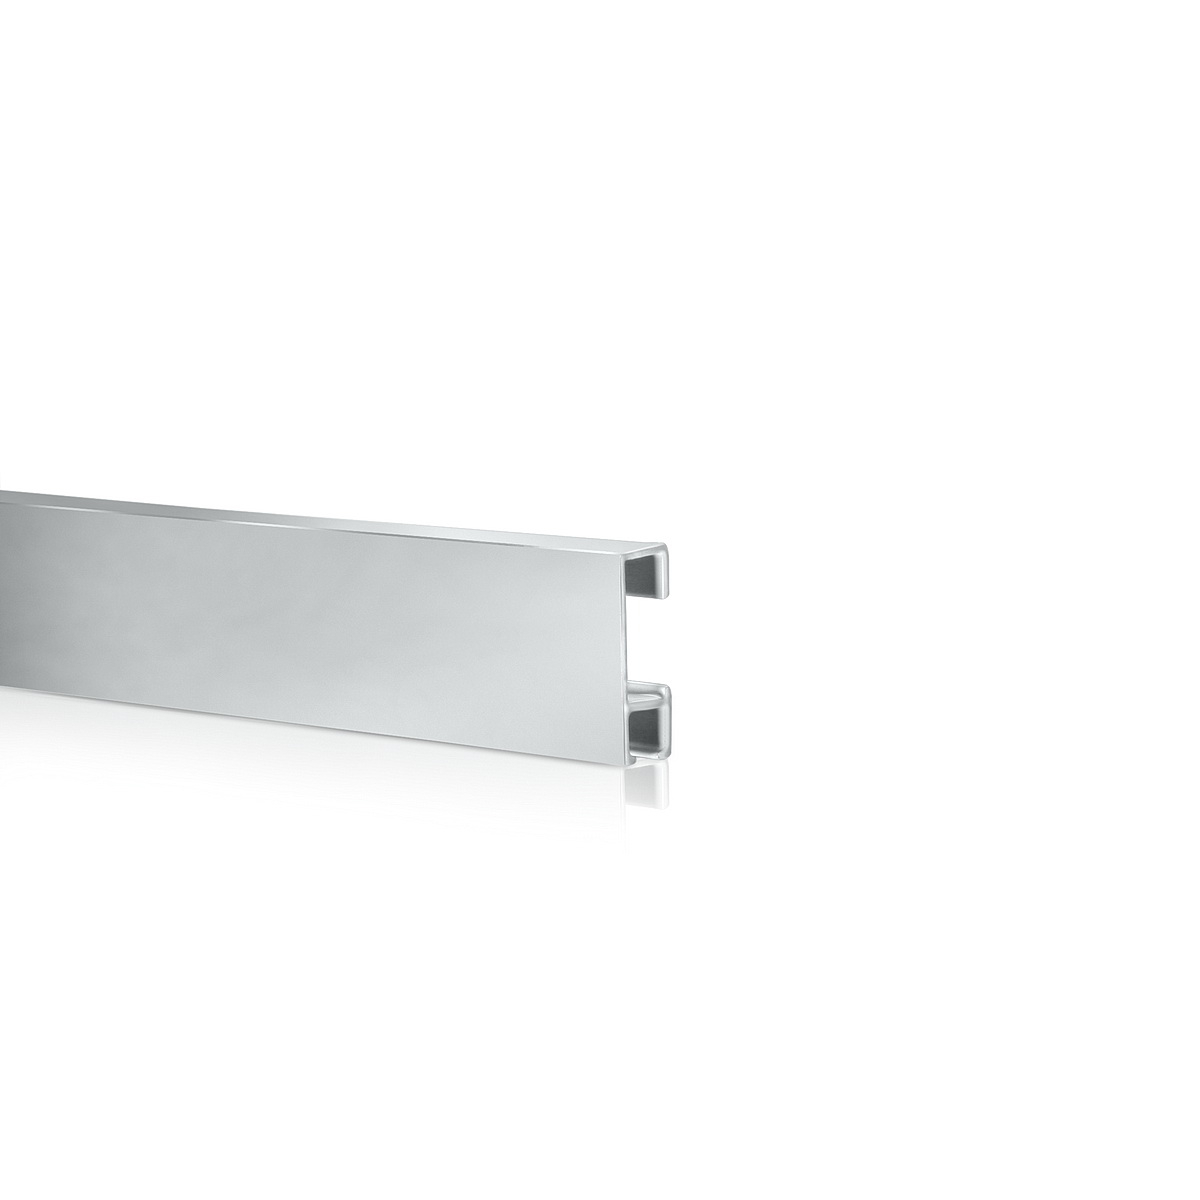 Easy Rail System, Clear Anodized Finish